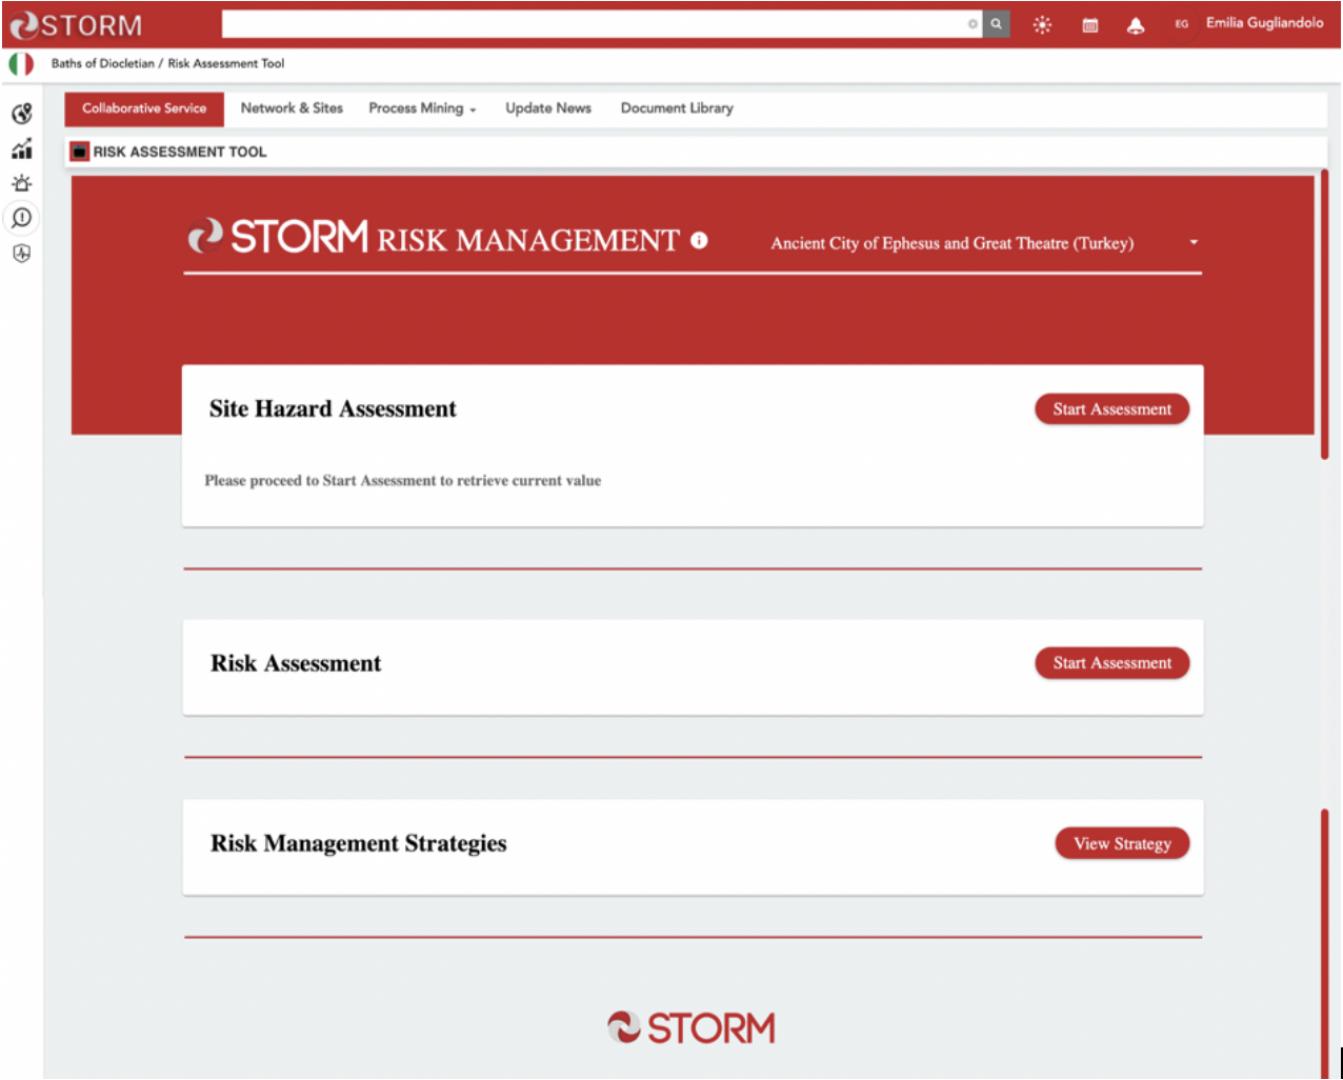 The Risk Management Dashboard allows to perform Site Hazard Assessment, Risk Assessment and display the Risk Management Strategies  